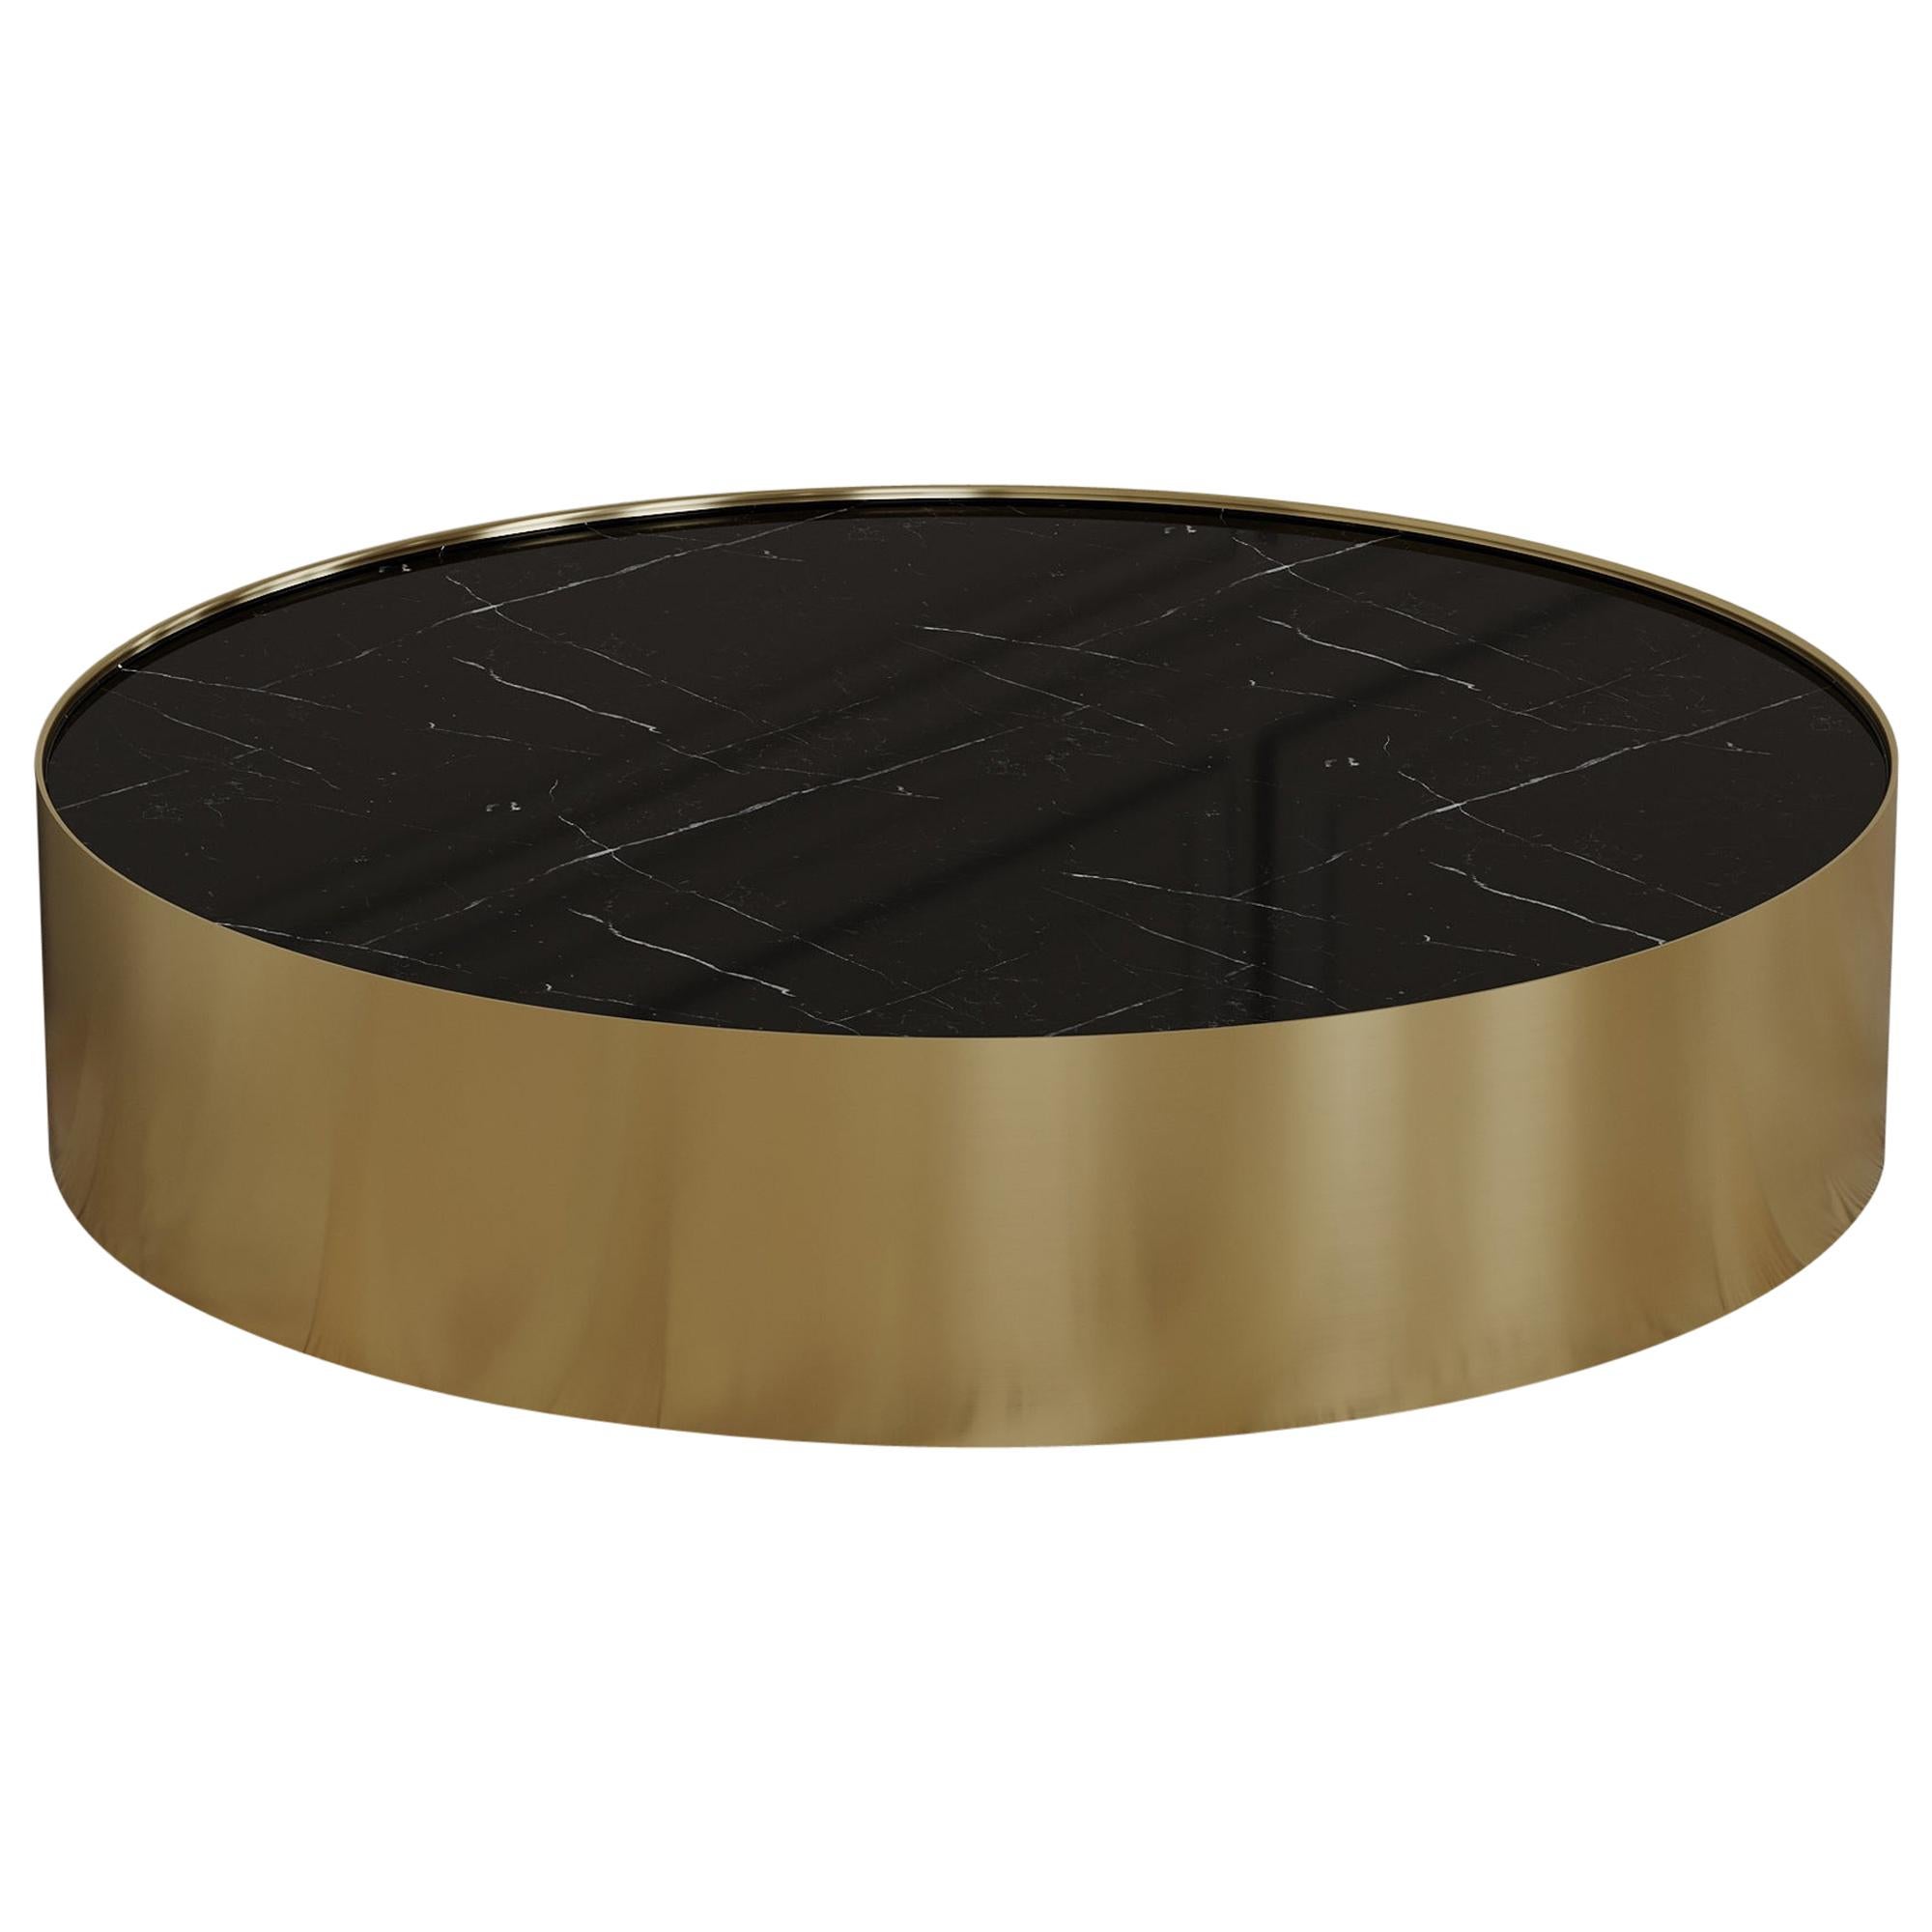 Afterglow Round Coffee Table of Marble and Brass, Made in Italy For Sale